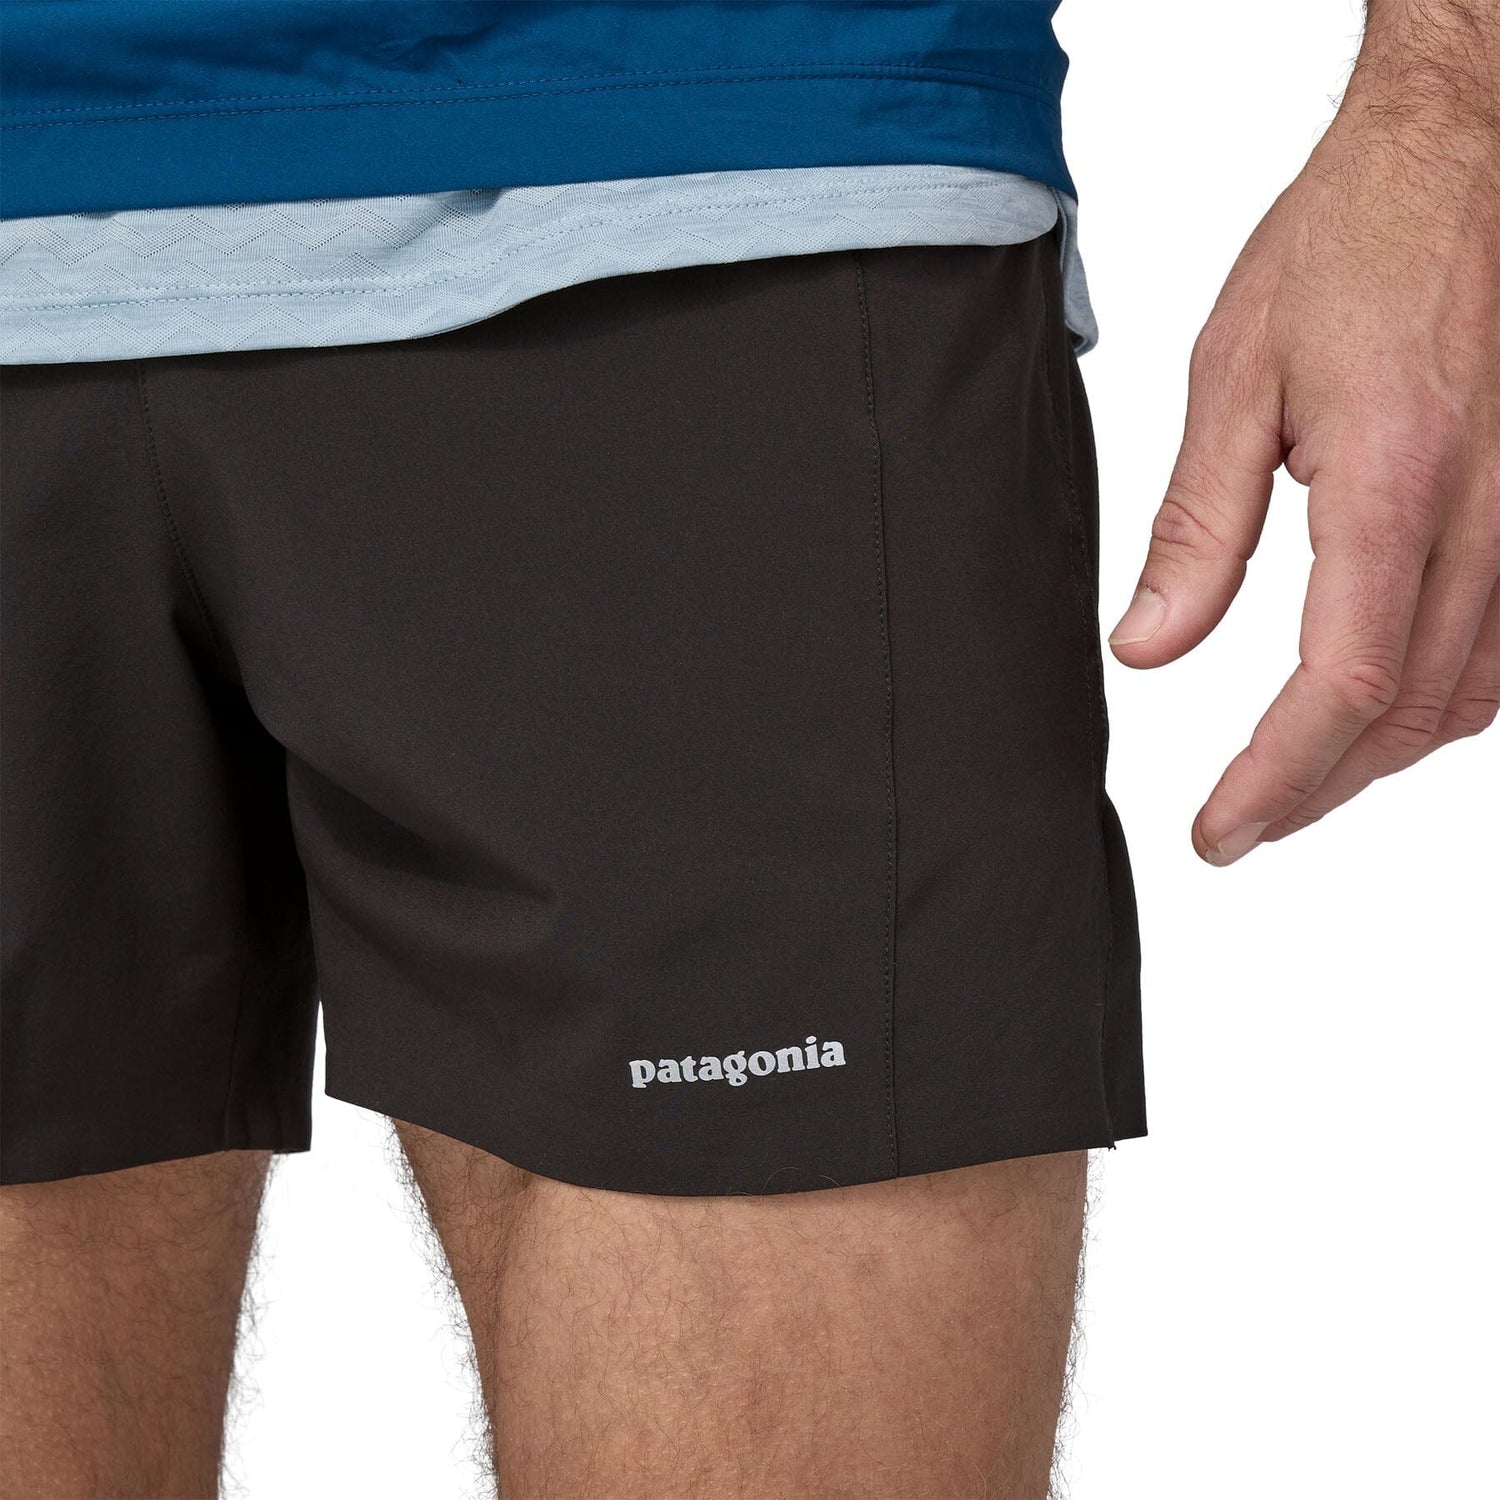 Patagonia M's Strider Pro Shorts 5'' - Recycled Polyester Black Pants